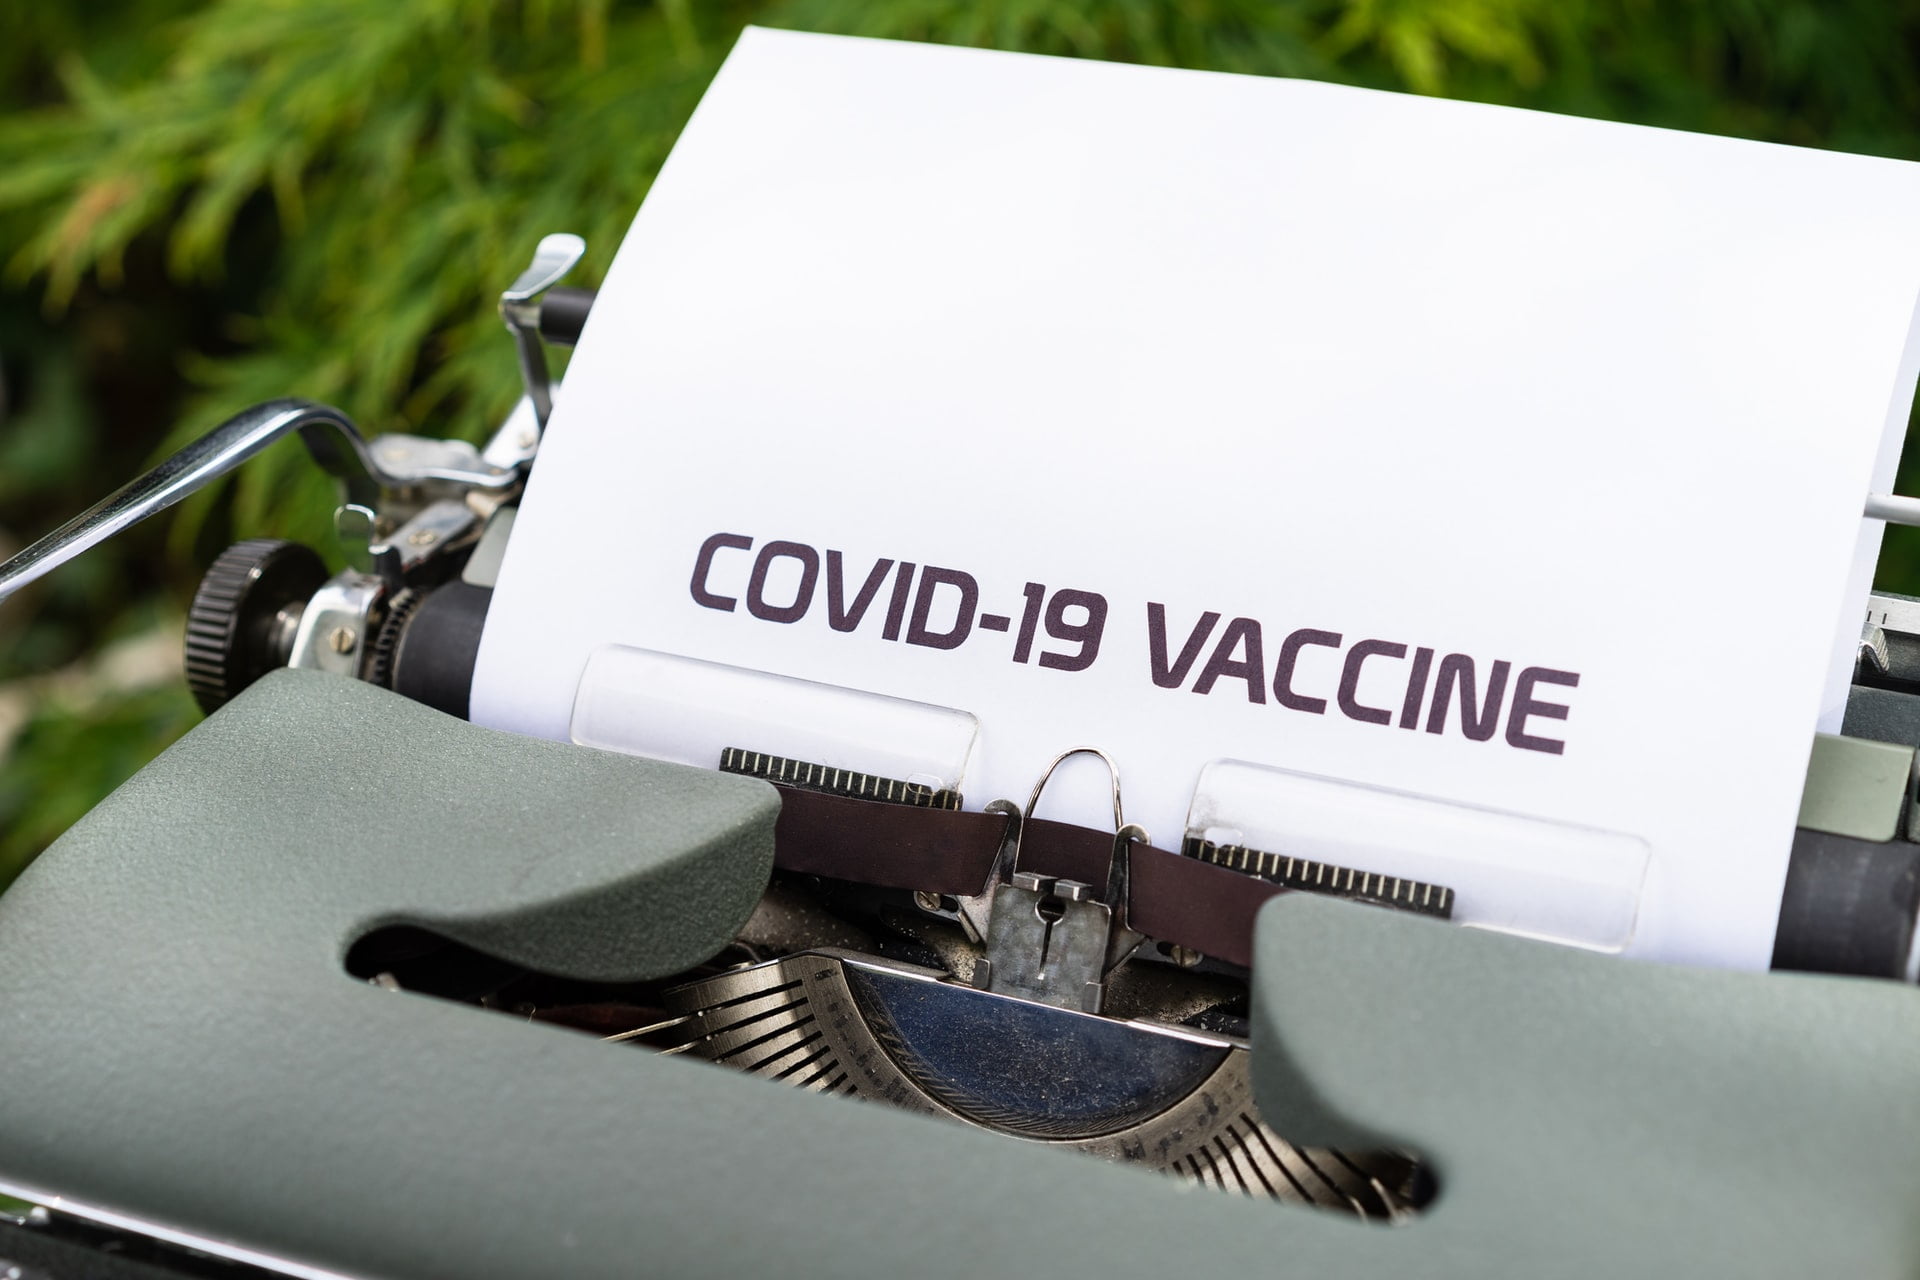 Covid-19 Vaccine Breakthrough; Moderna Cov Vaccine Is 94.1% Efficient Without Any Safety Concerns